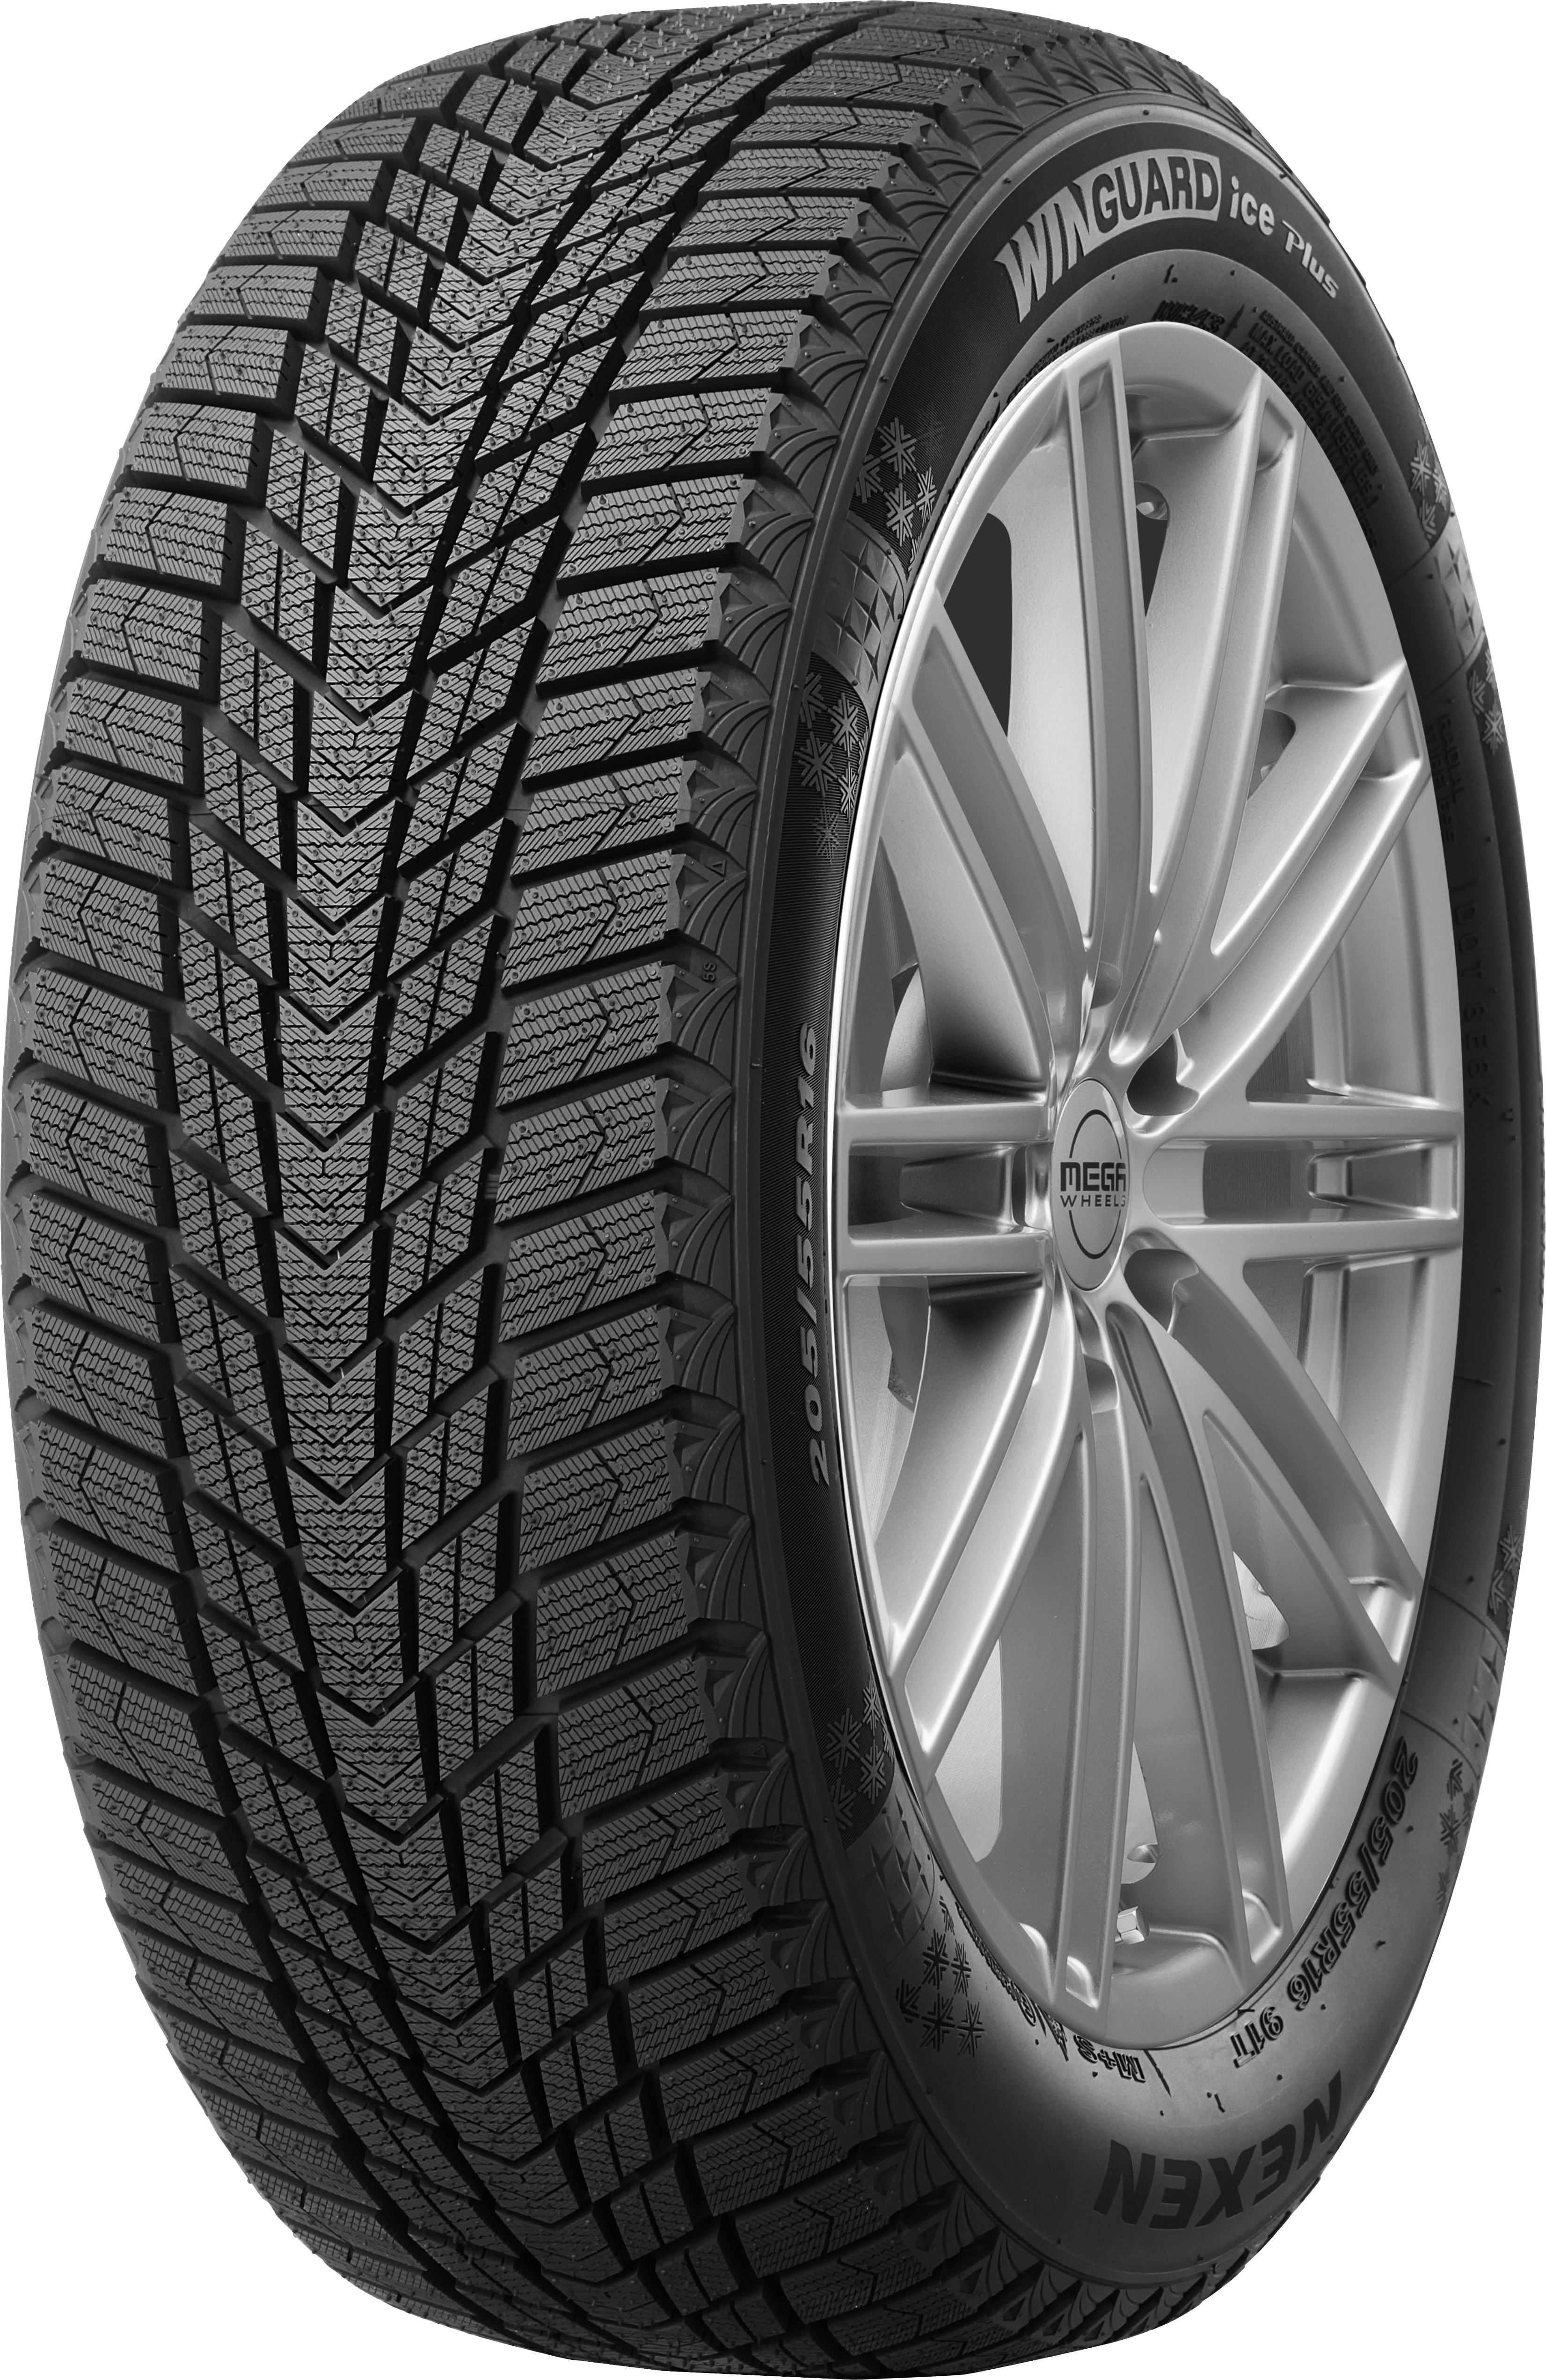 Tests Winguard Reviews - WH43 Ice Plus and Nexen Tire